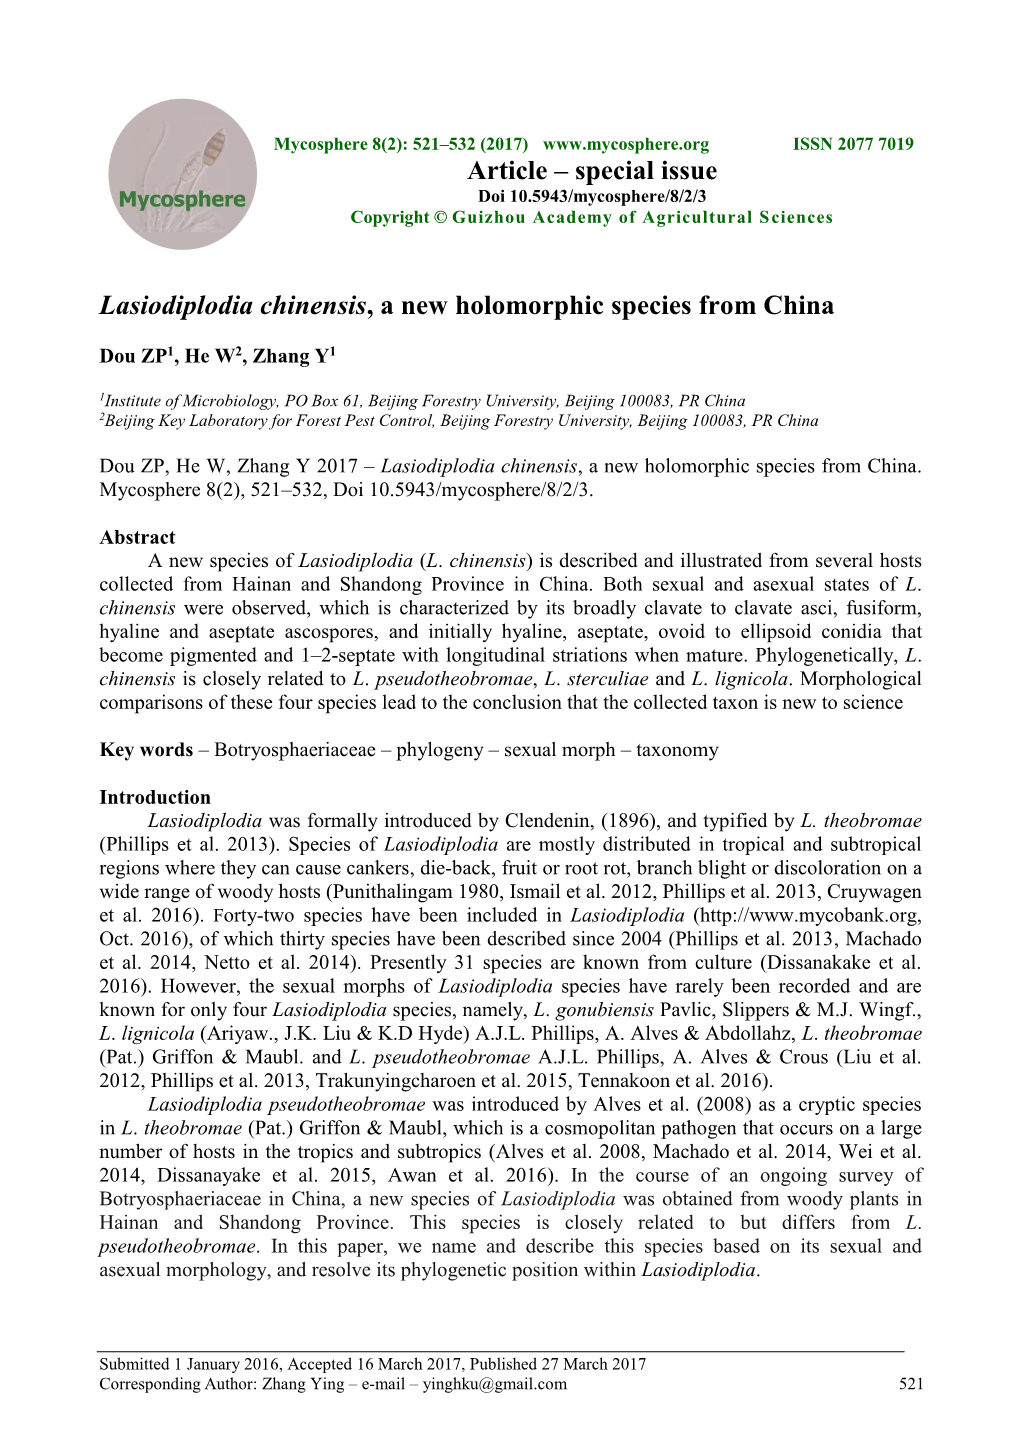 Lasiodiplodia Chinensis, a New Holomorphic Species from China